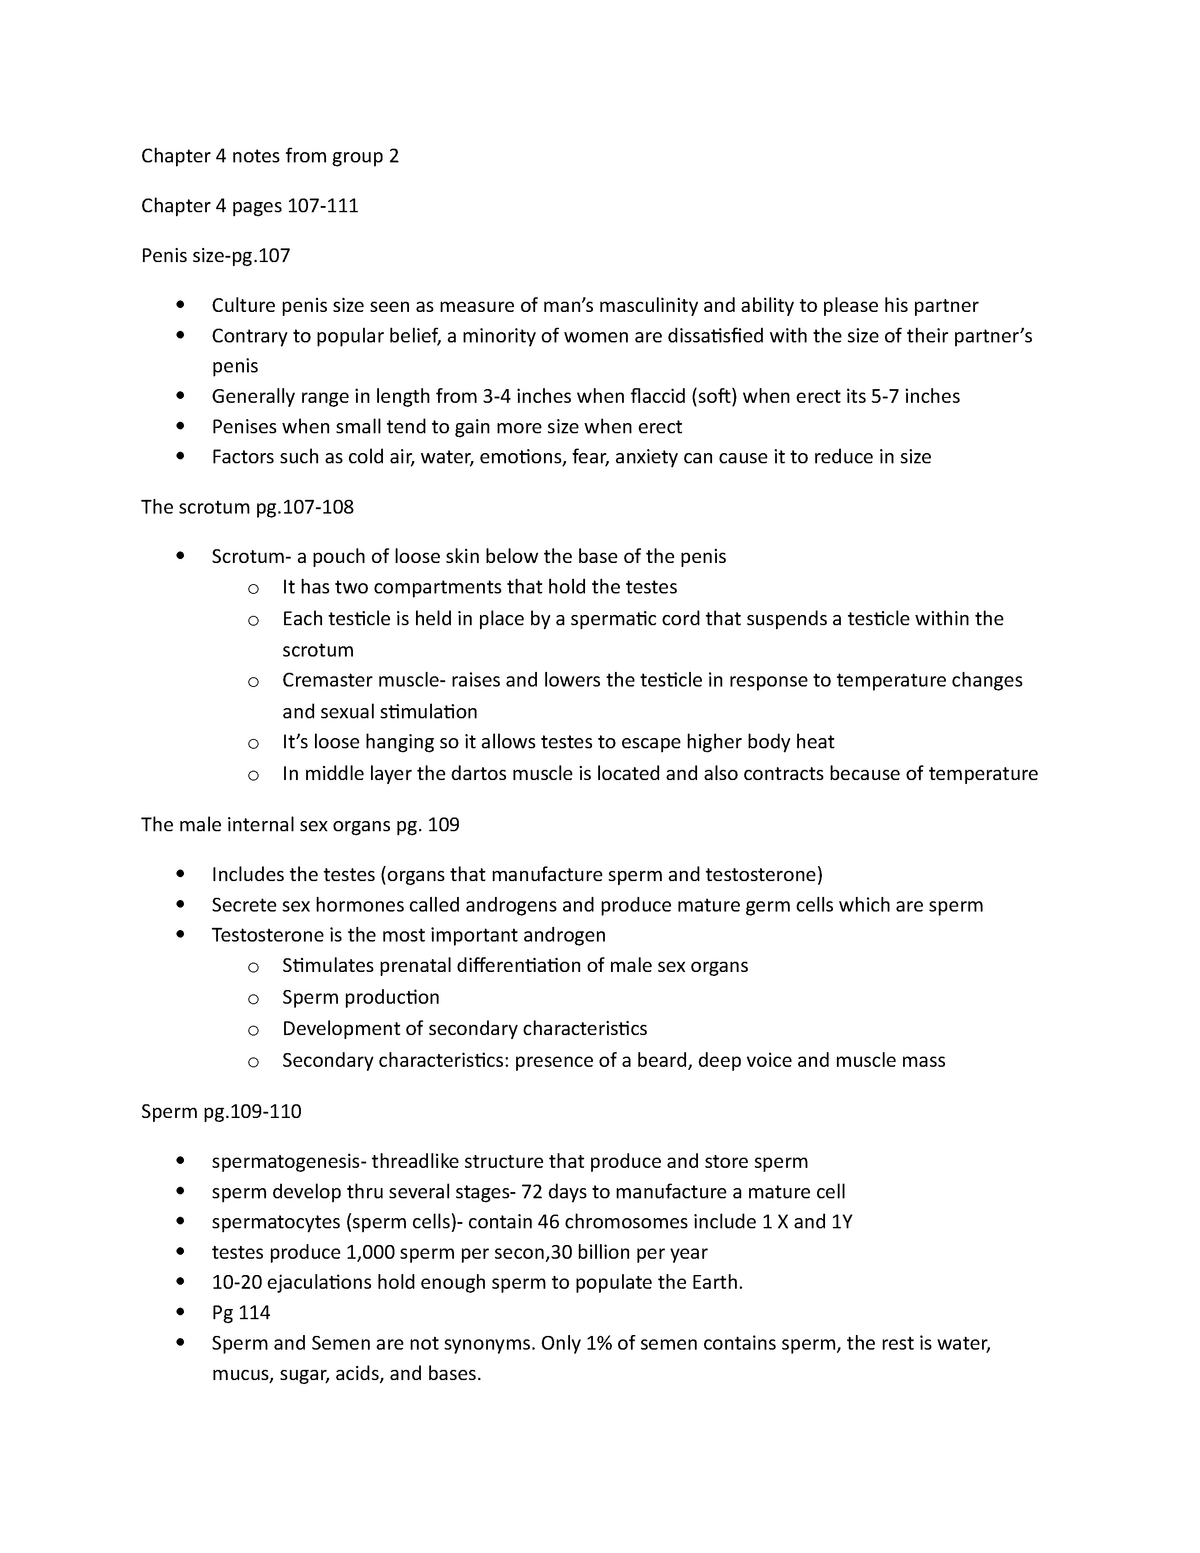 Male Physiology - Group Reports - Chapter 4 notes from group 2 Chapter ...